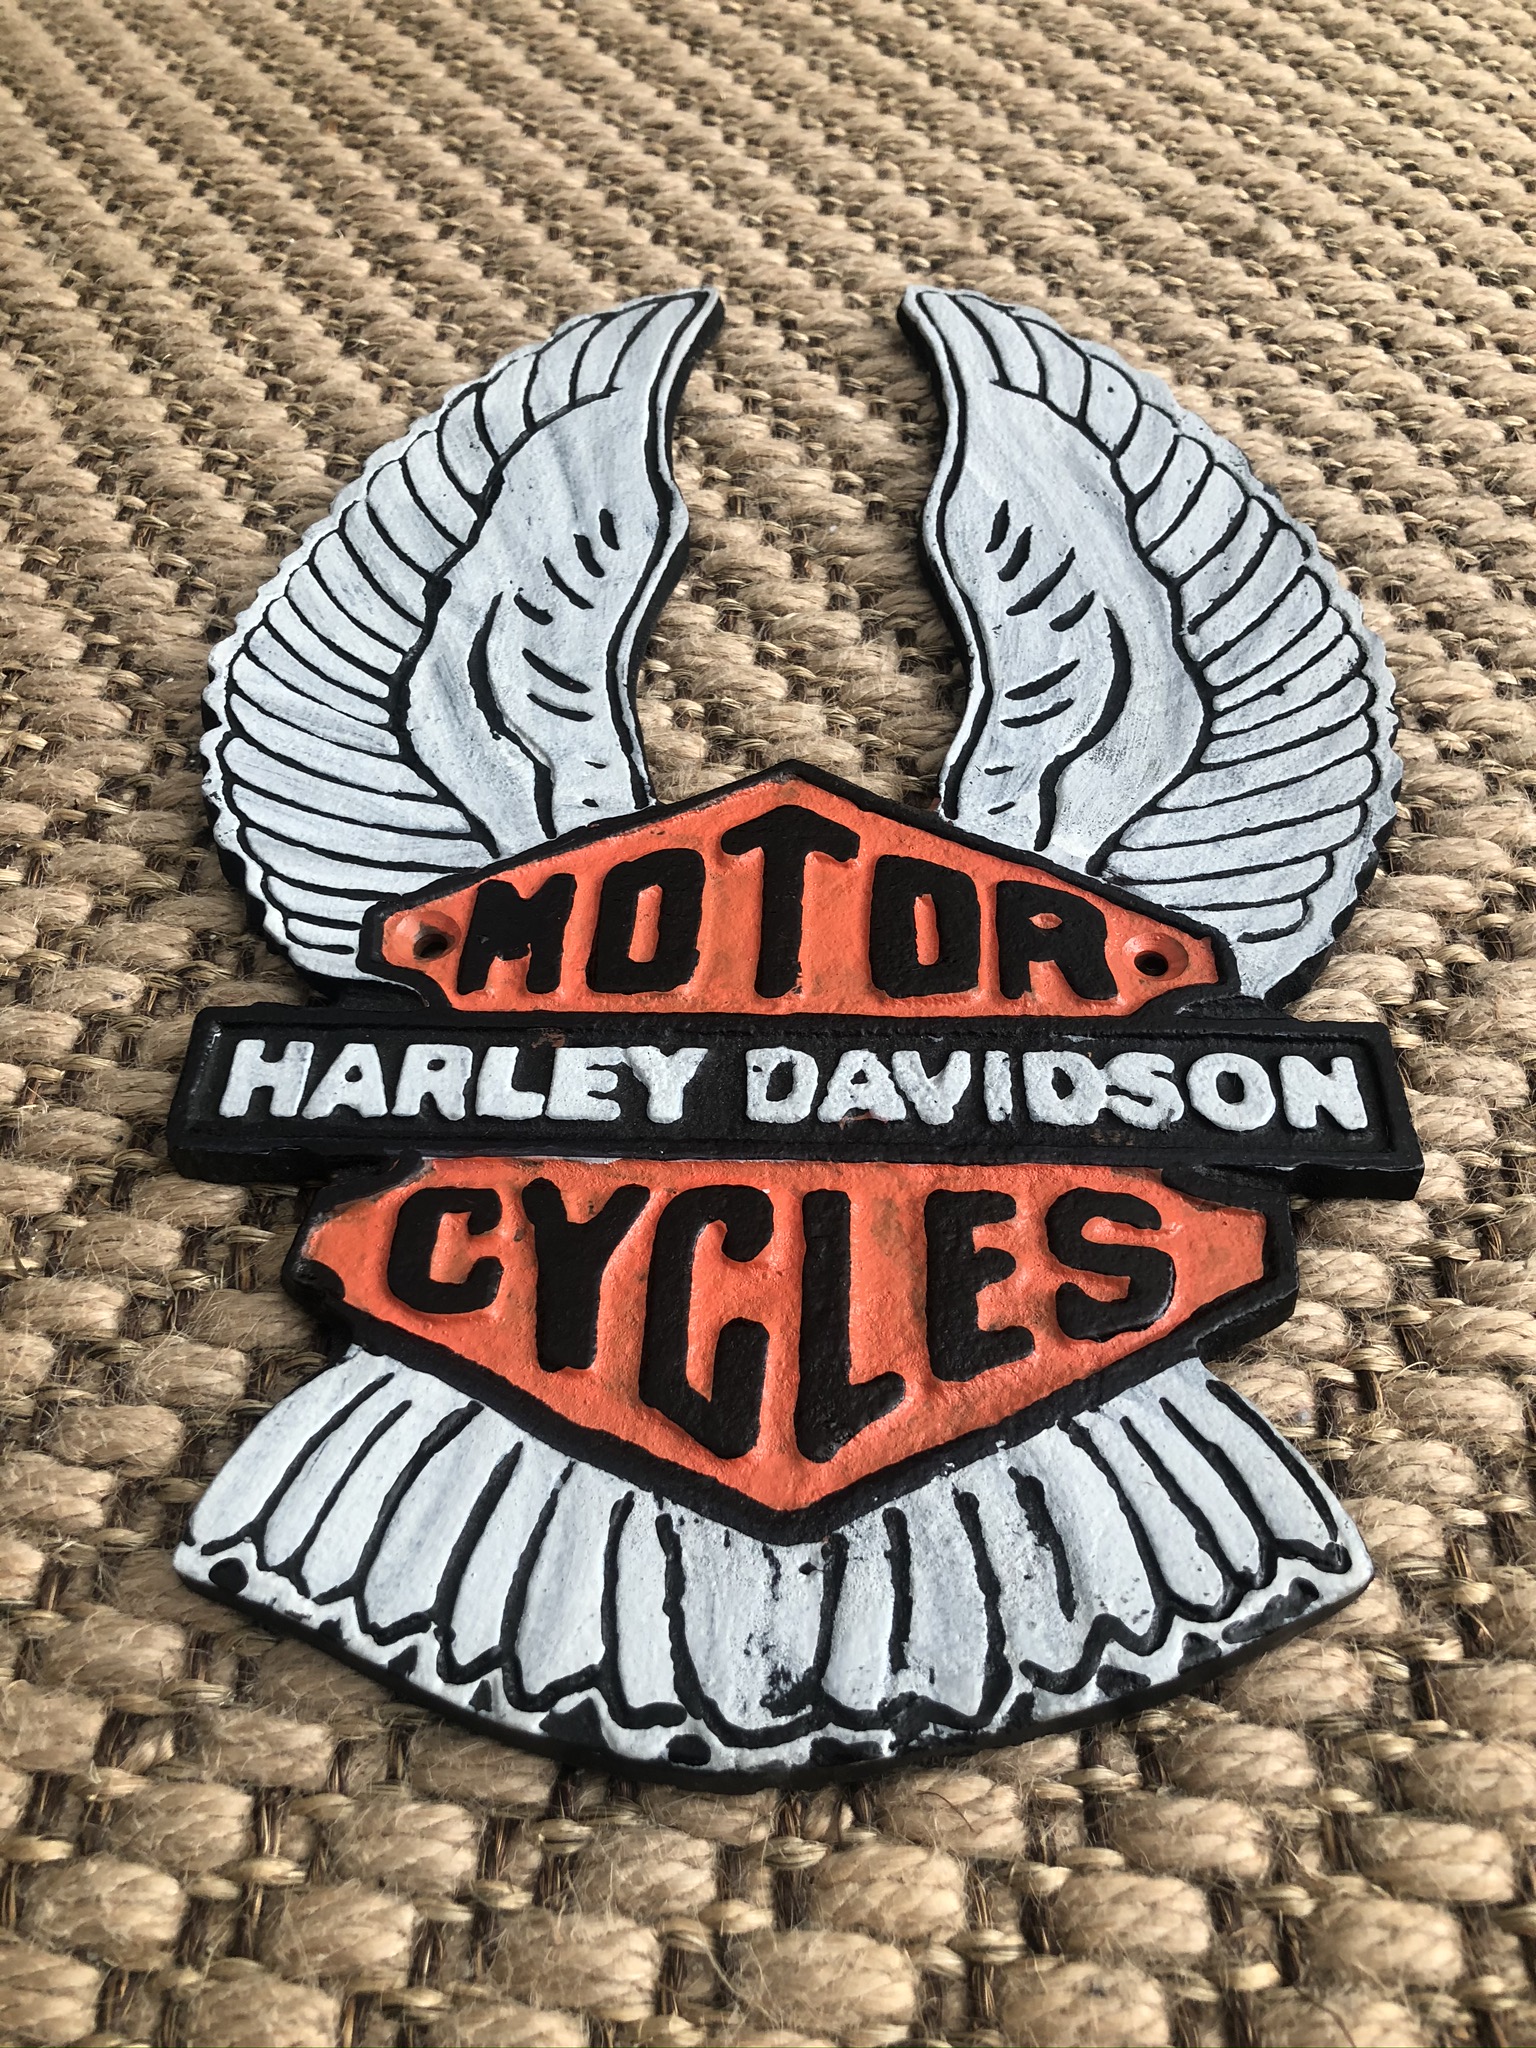 Cast Iron Harley Davidson Motorcycles Tall Wing Wall Plaque - Image 2 of 3